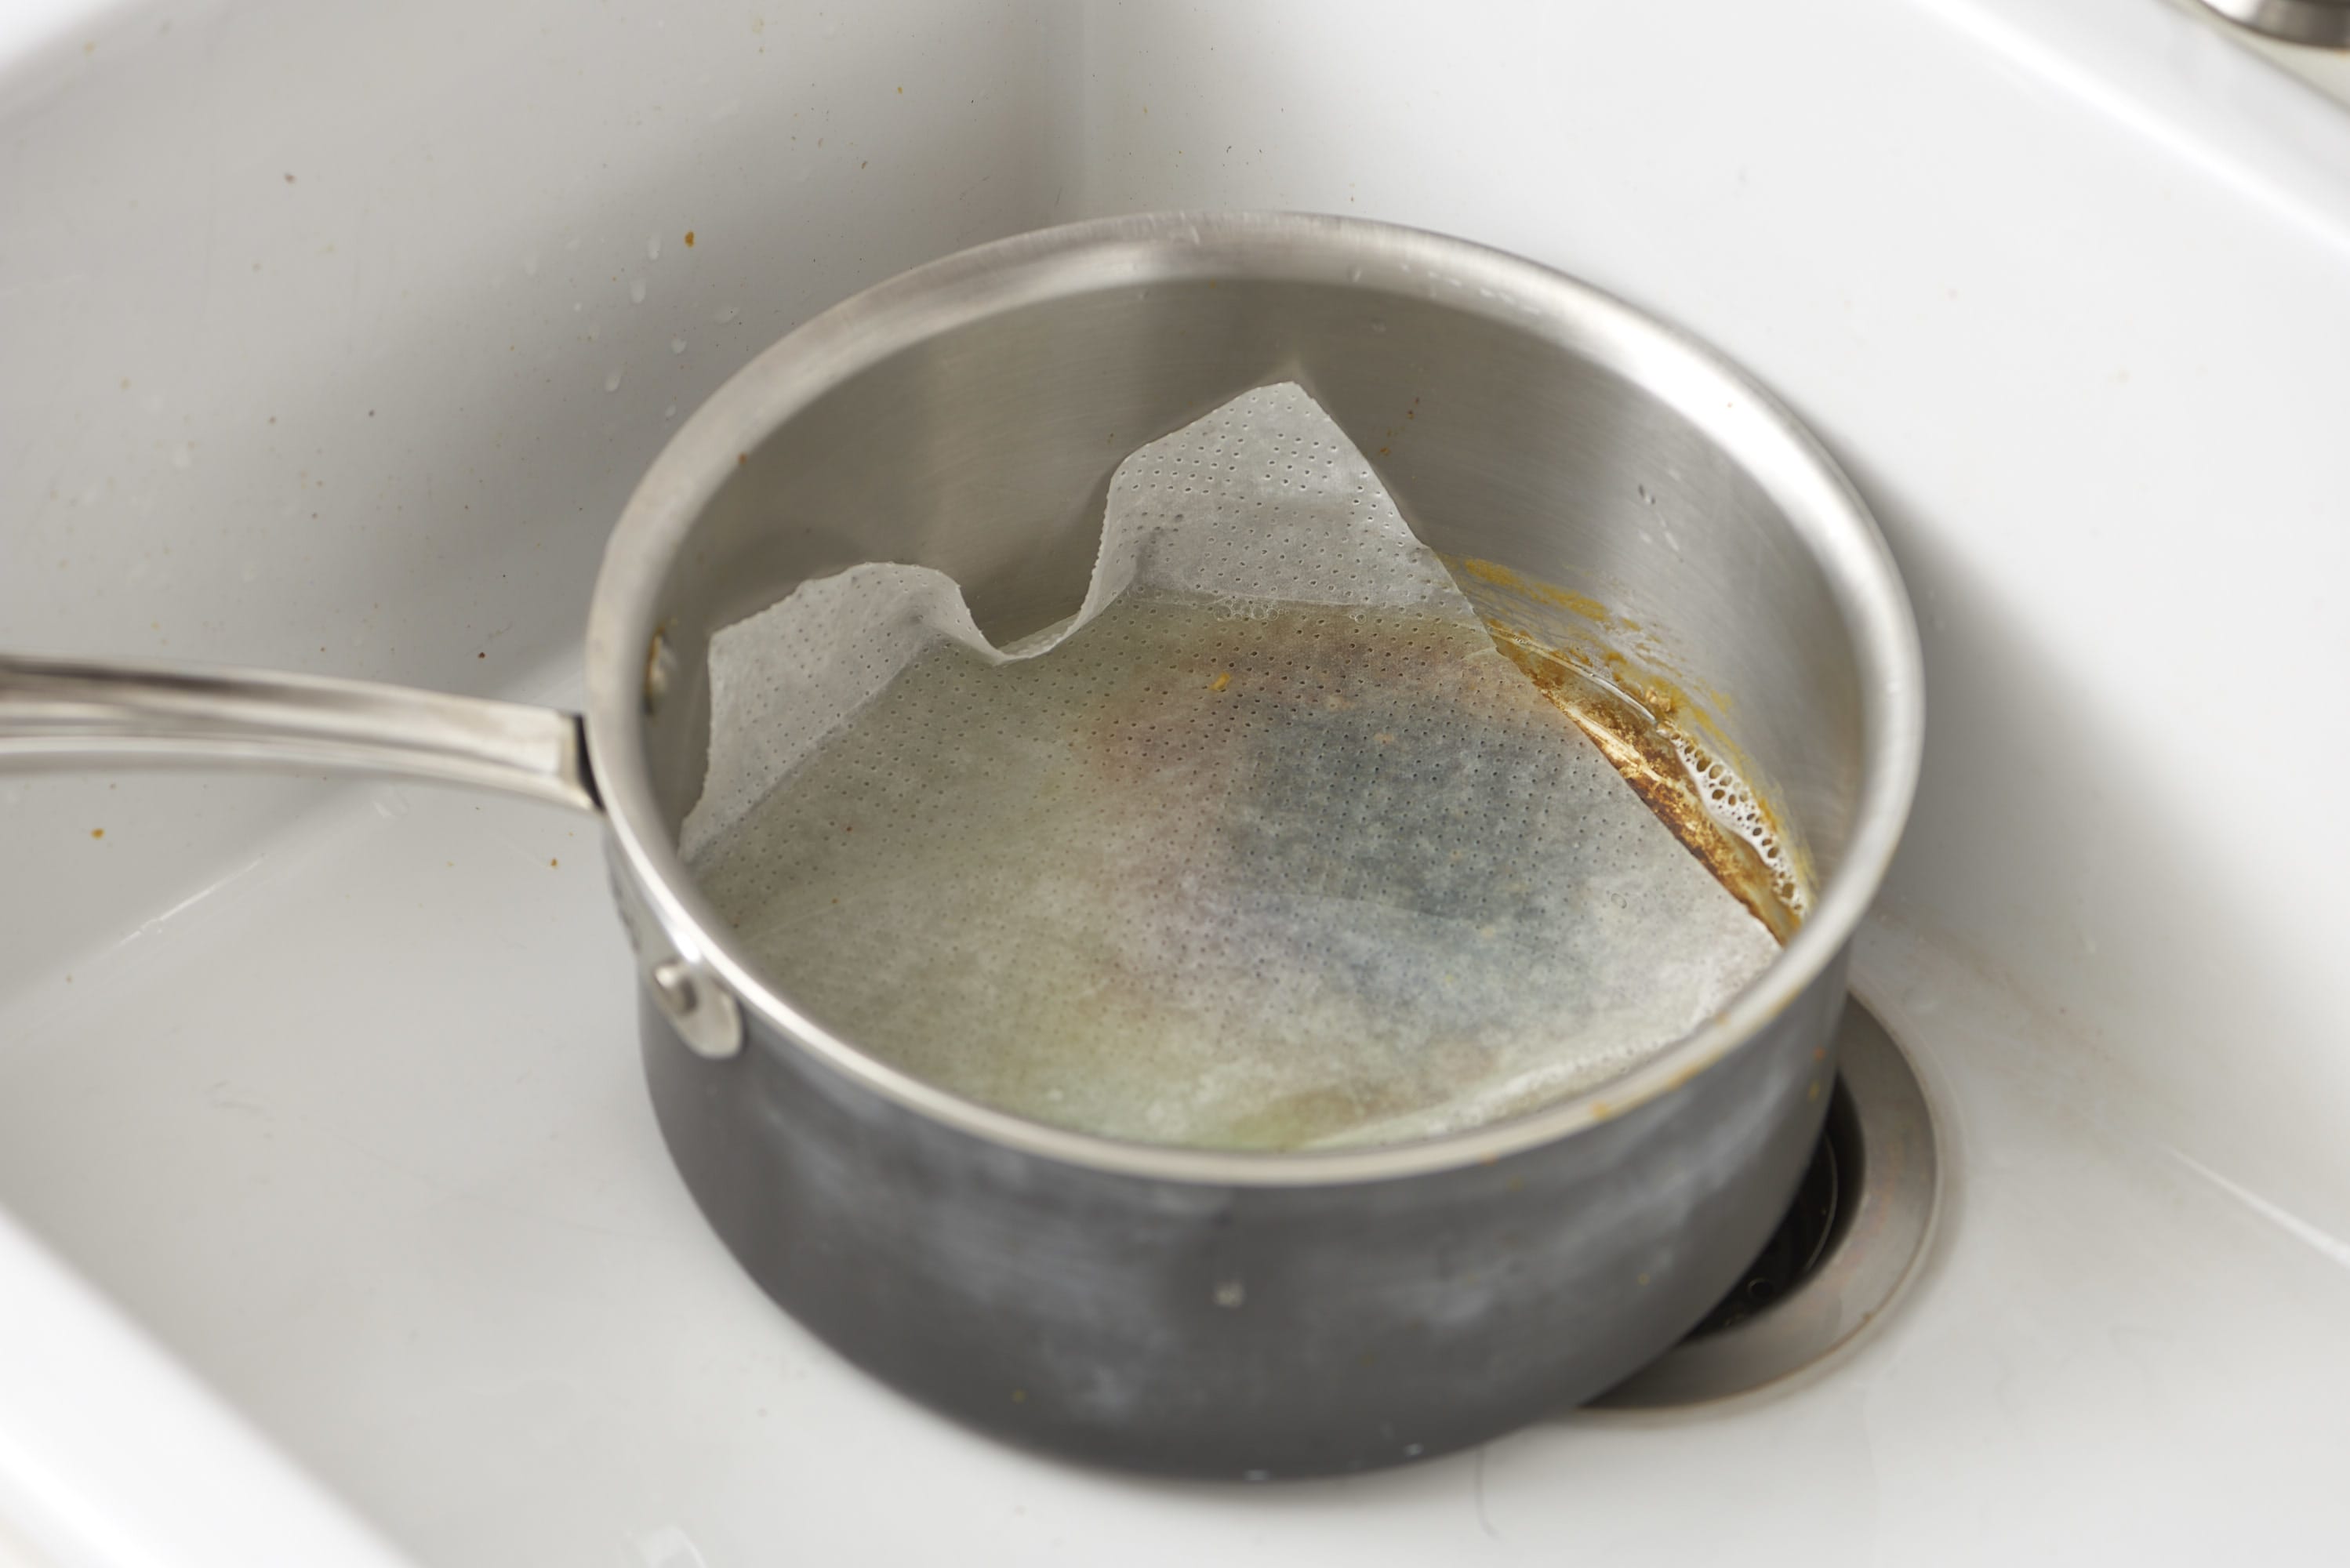 Pot Boiled Dry? How to Salvage Your Stainless Steel Pot